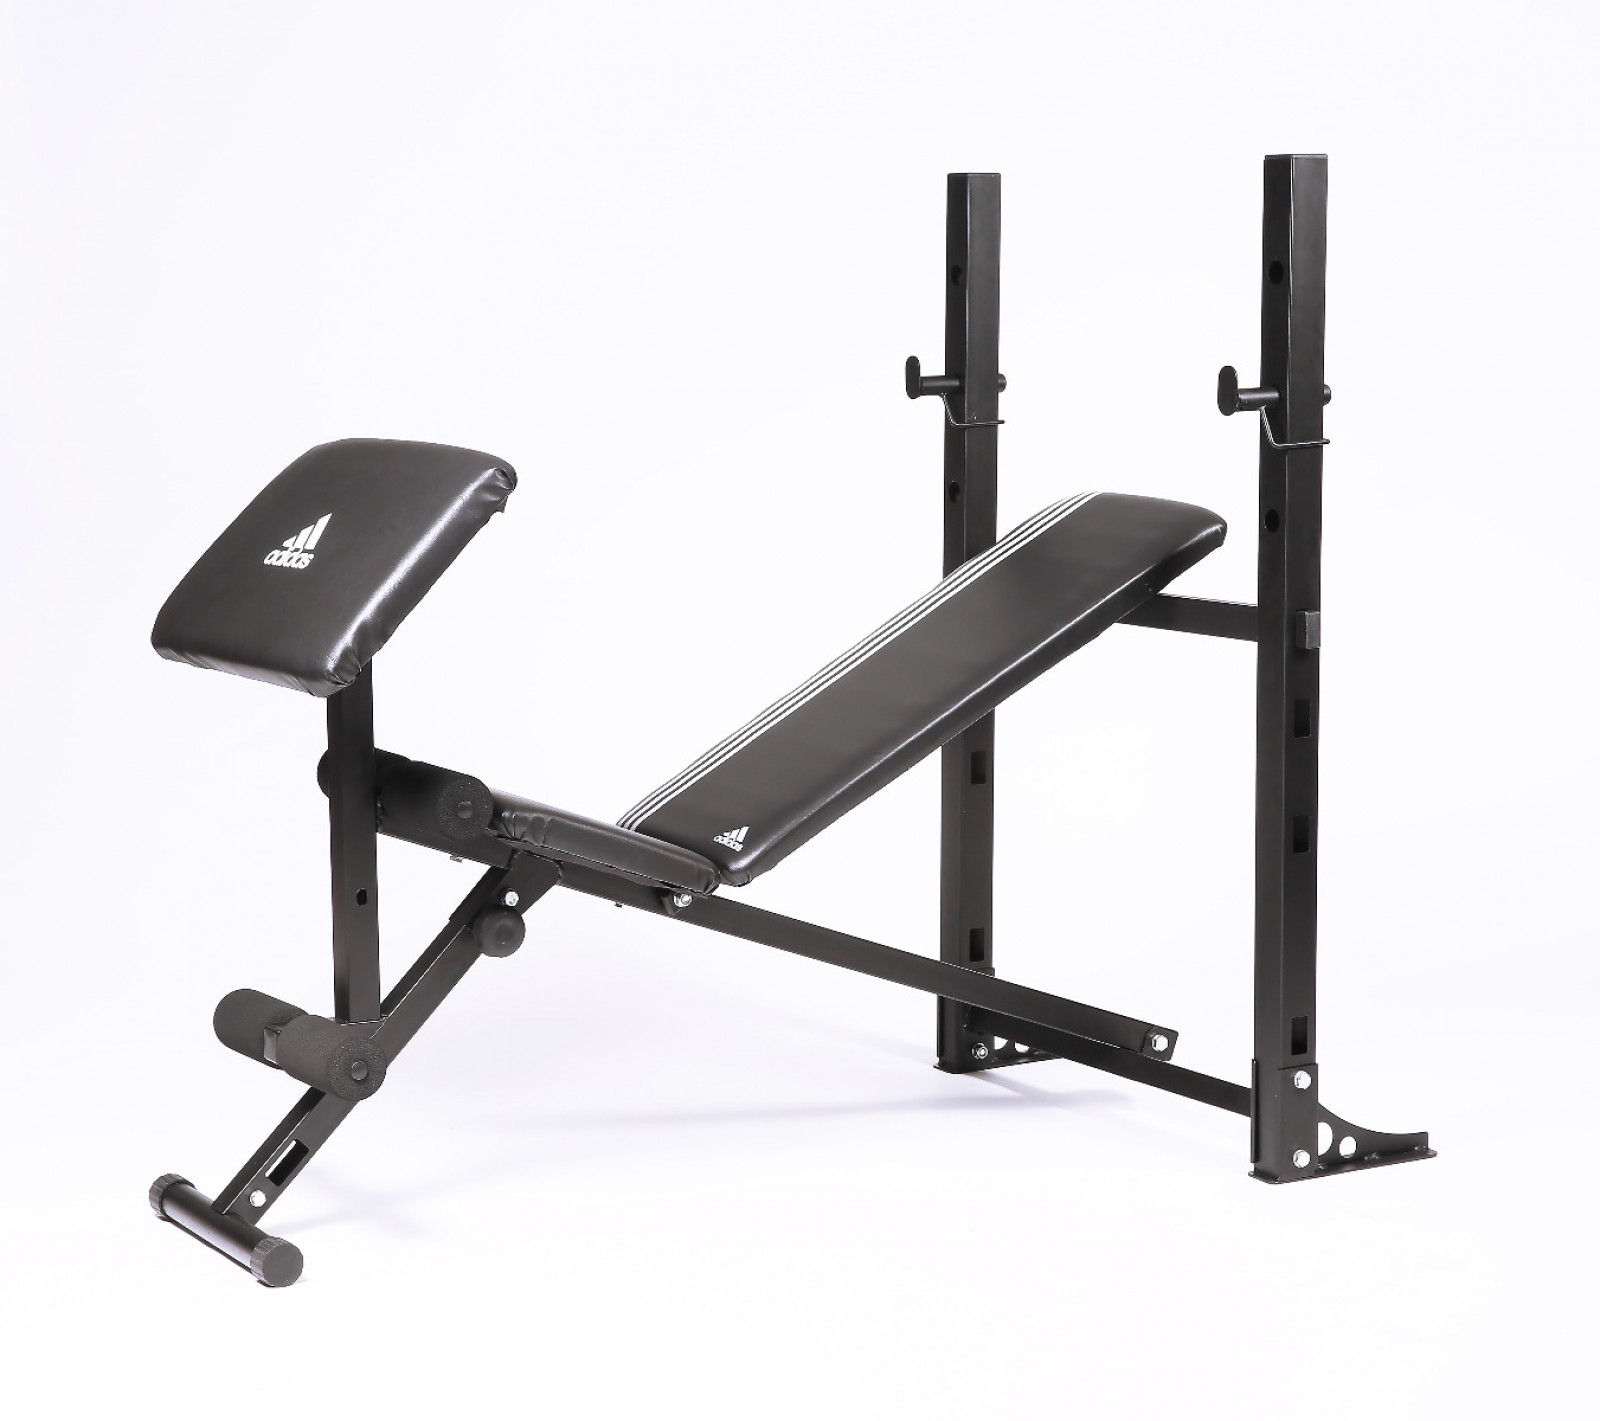 adidas bench press for sale